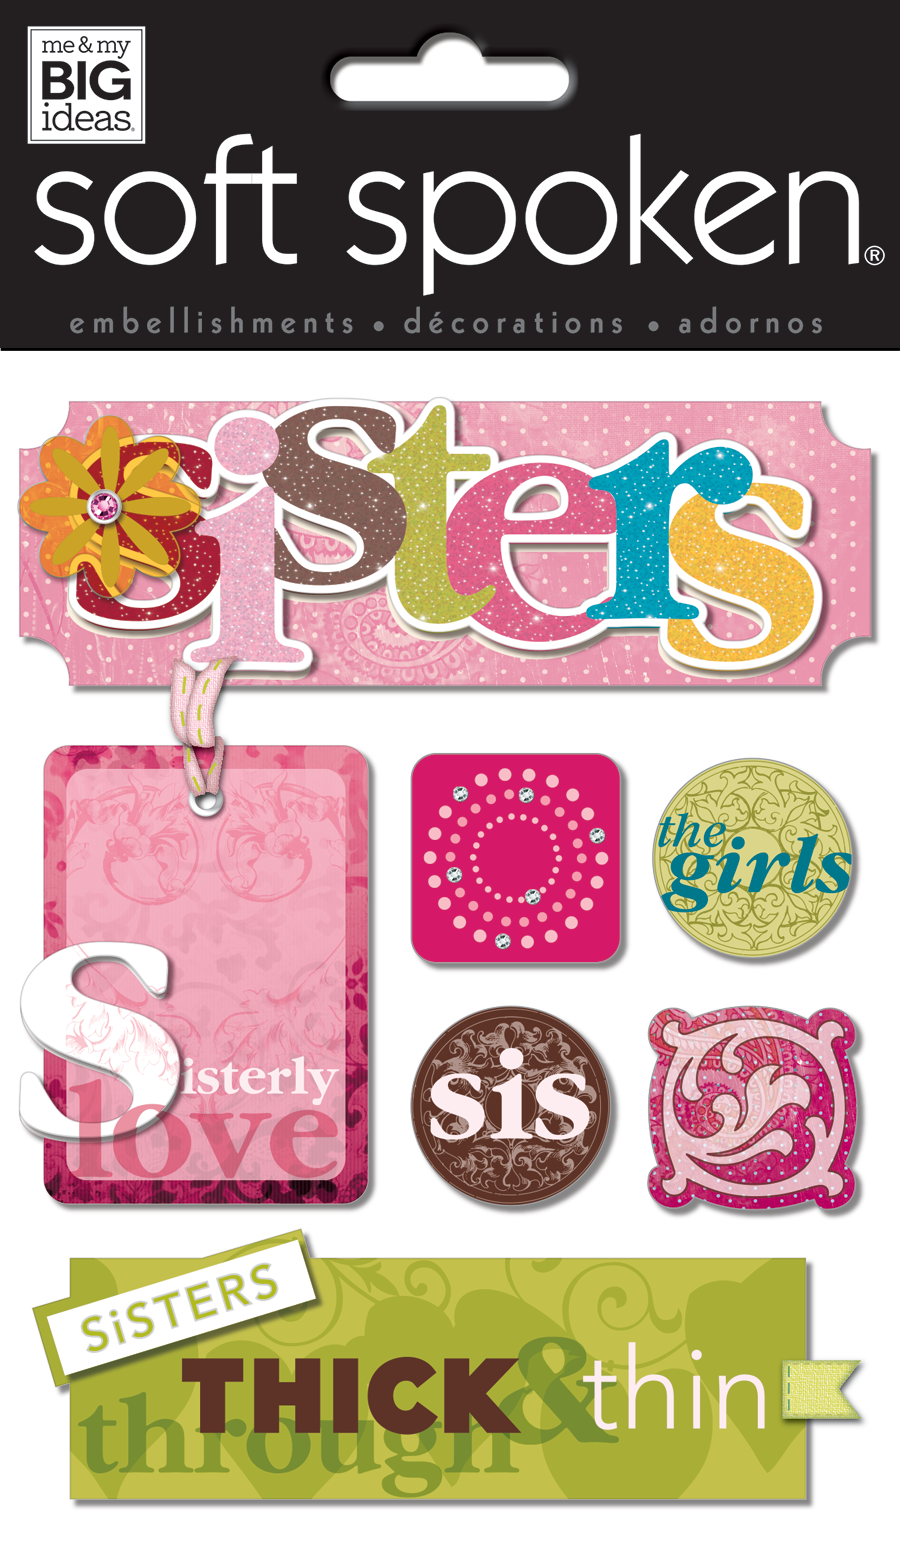 Stickers - Sister